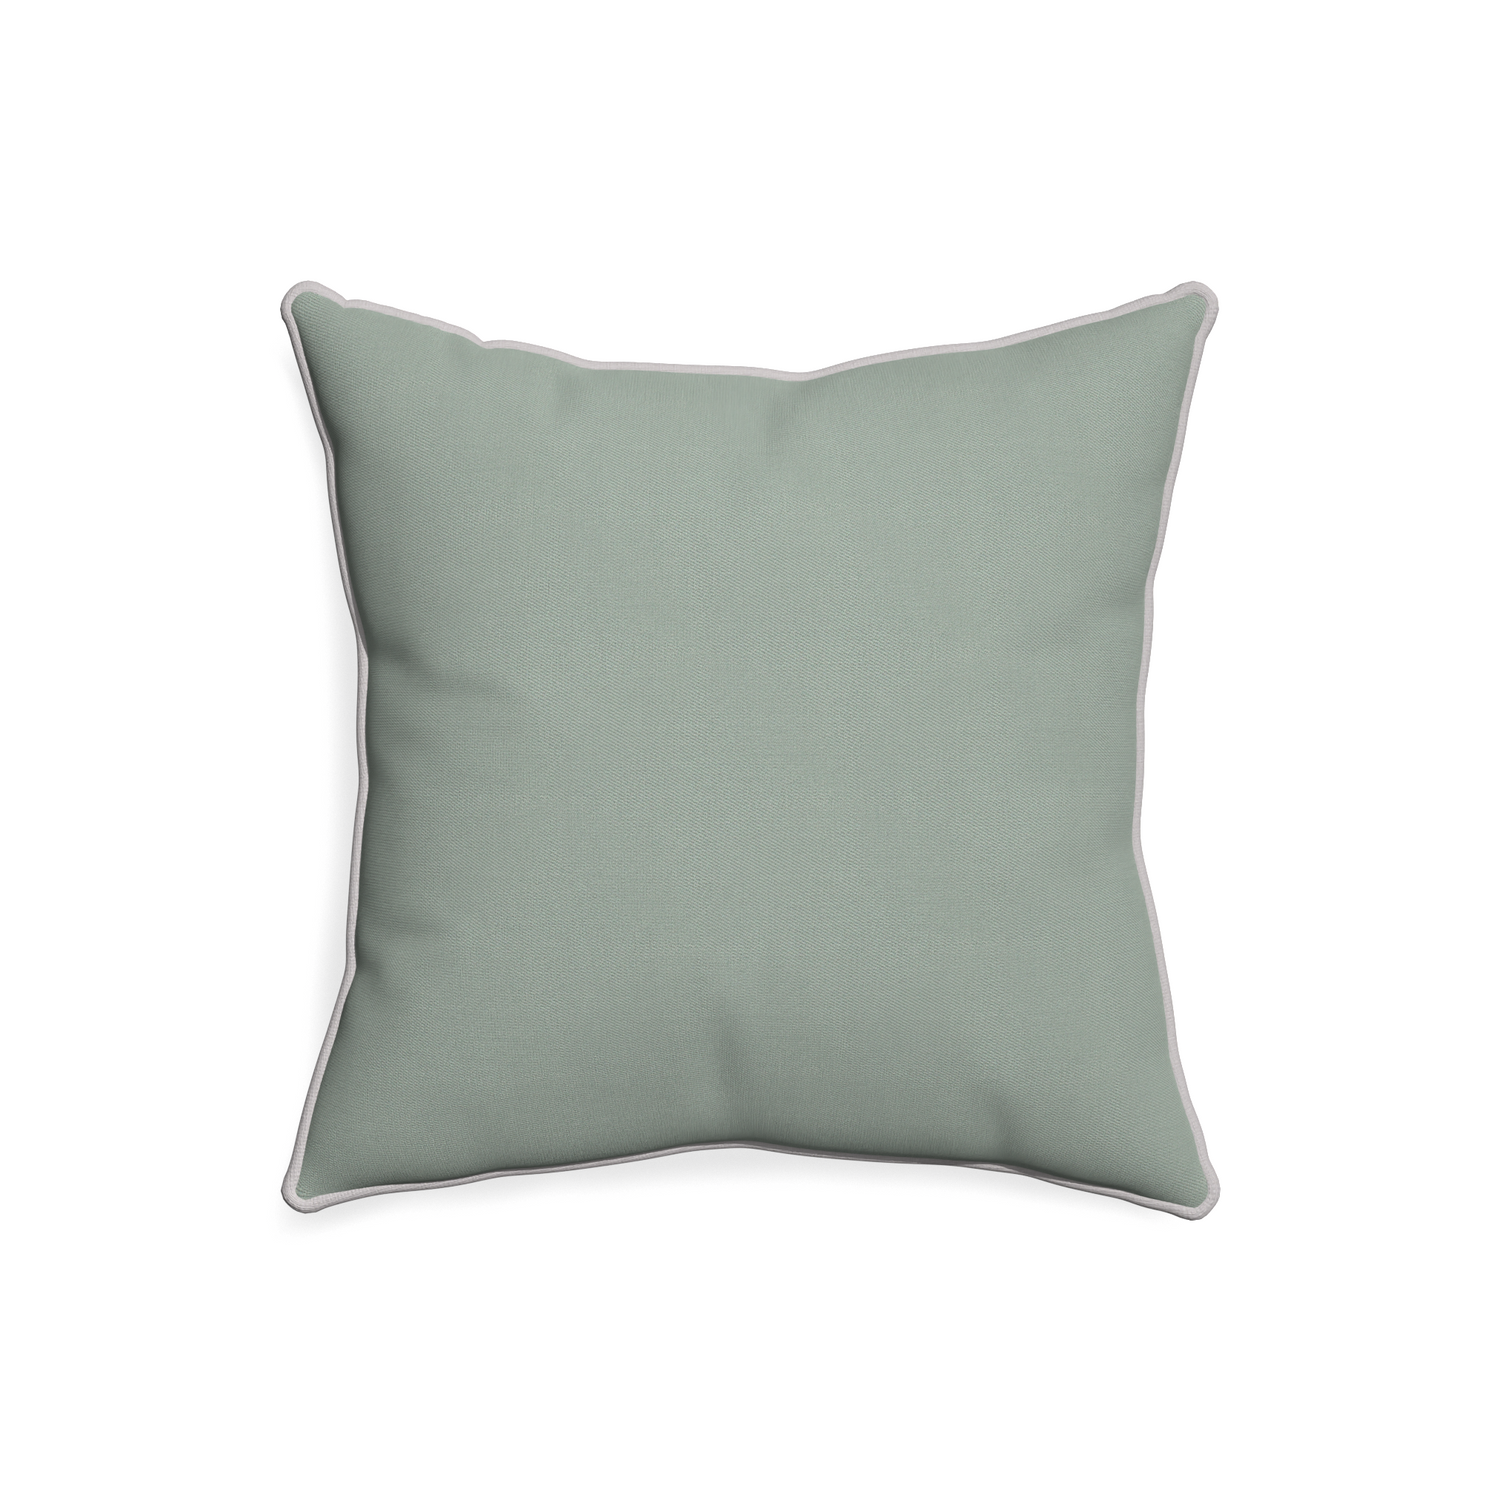 20-square sage custom pillow with pebble piping on white background